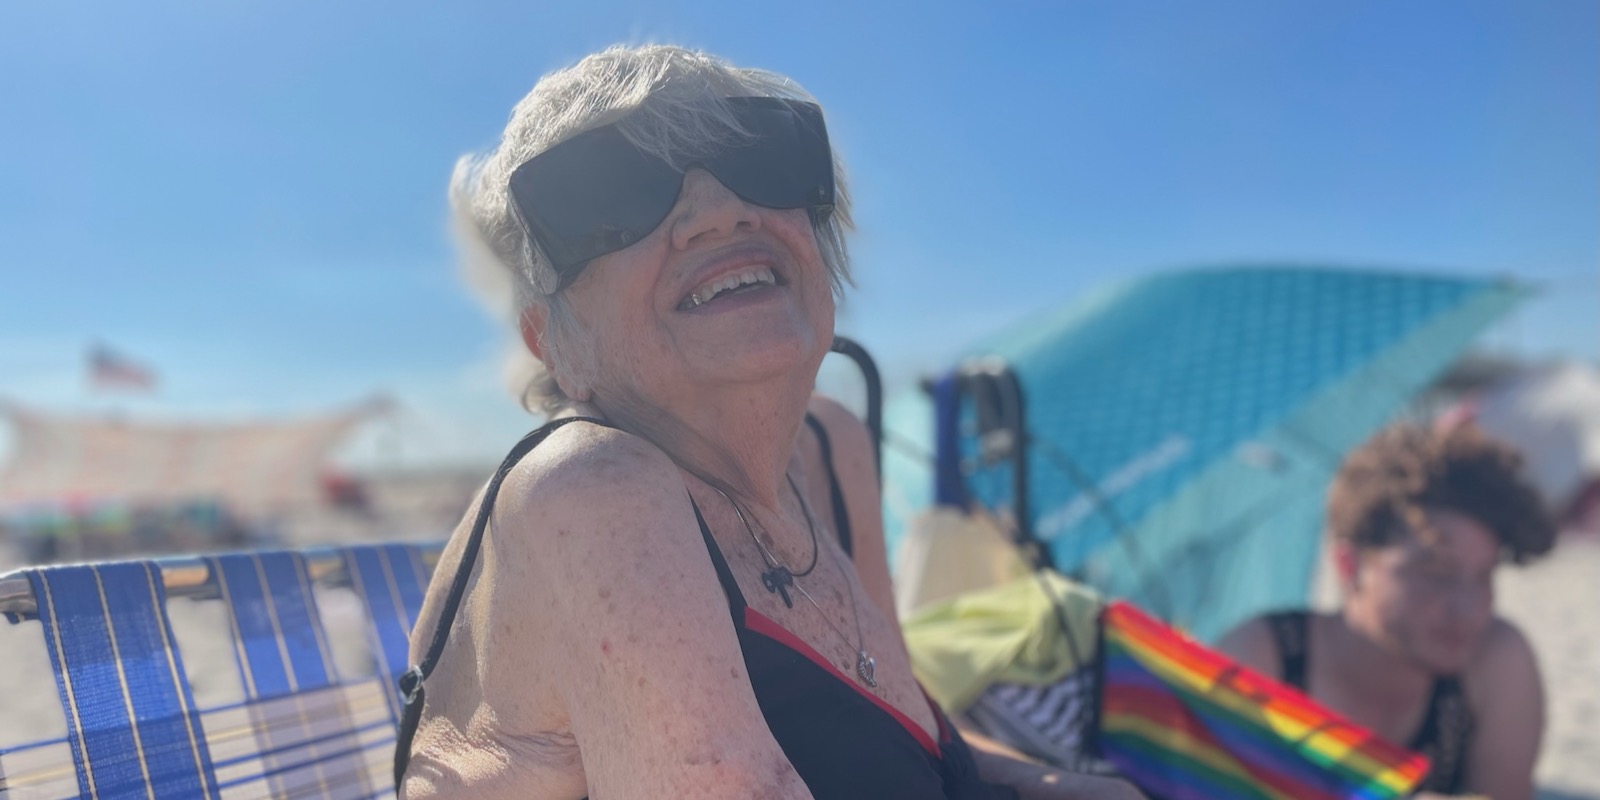 Shatzi Weisberger, known as The People's Bubbie, posing for a photo during Pride at Riis Beach. She is wearing dark sunglasses and a bathing suit and smiling at the camera as the sun lights up her whole face. A rainbow flag and some friends sit in the background.